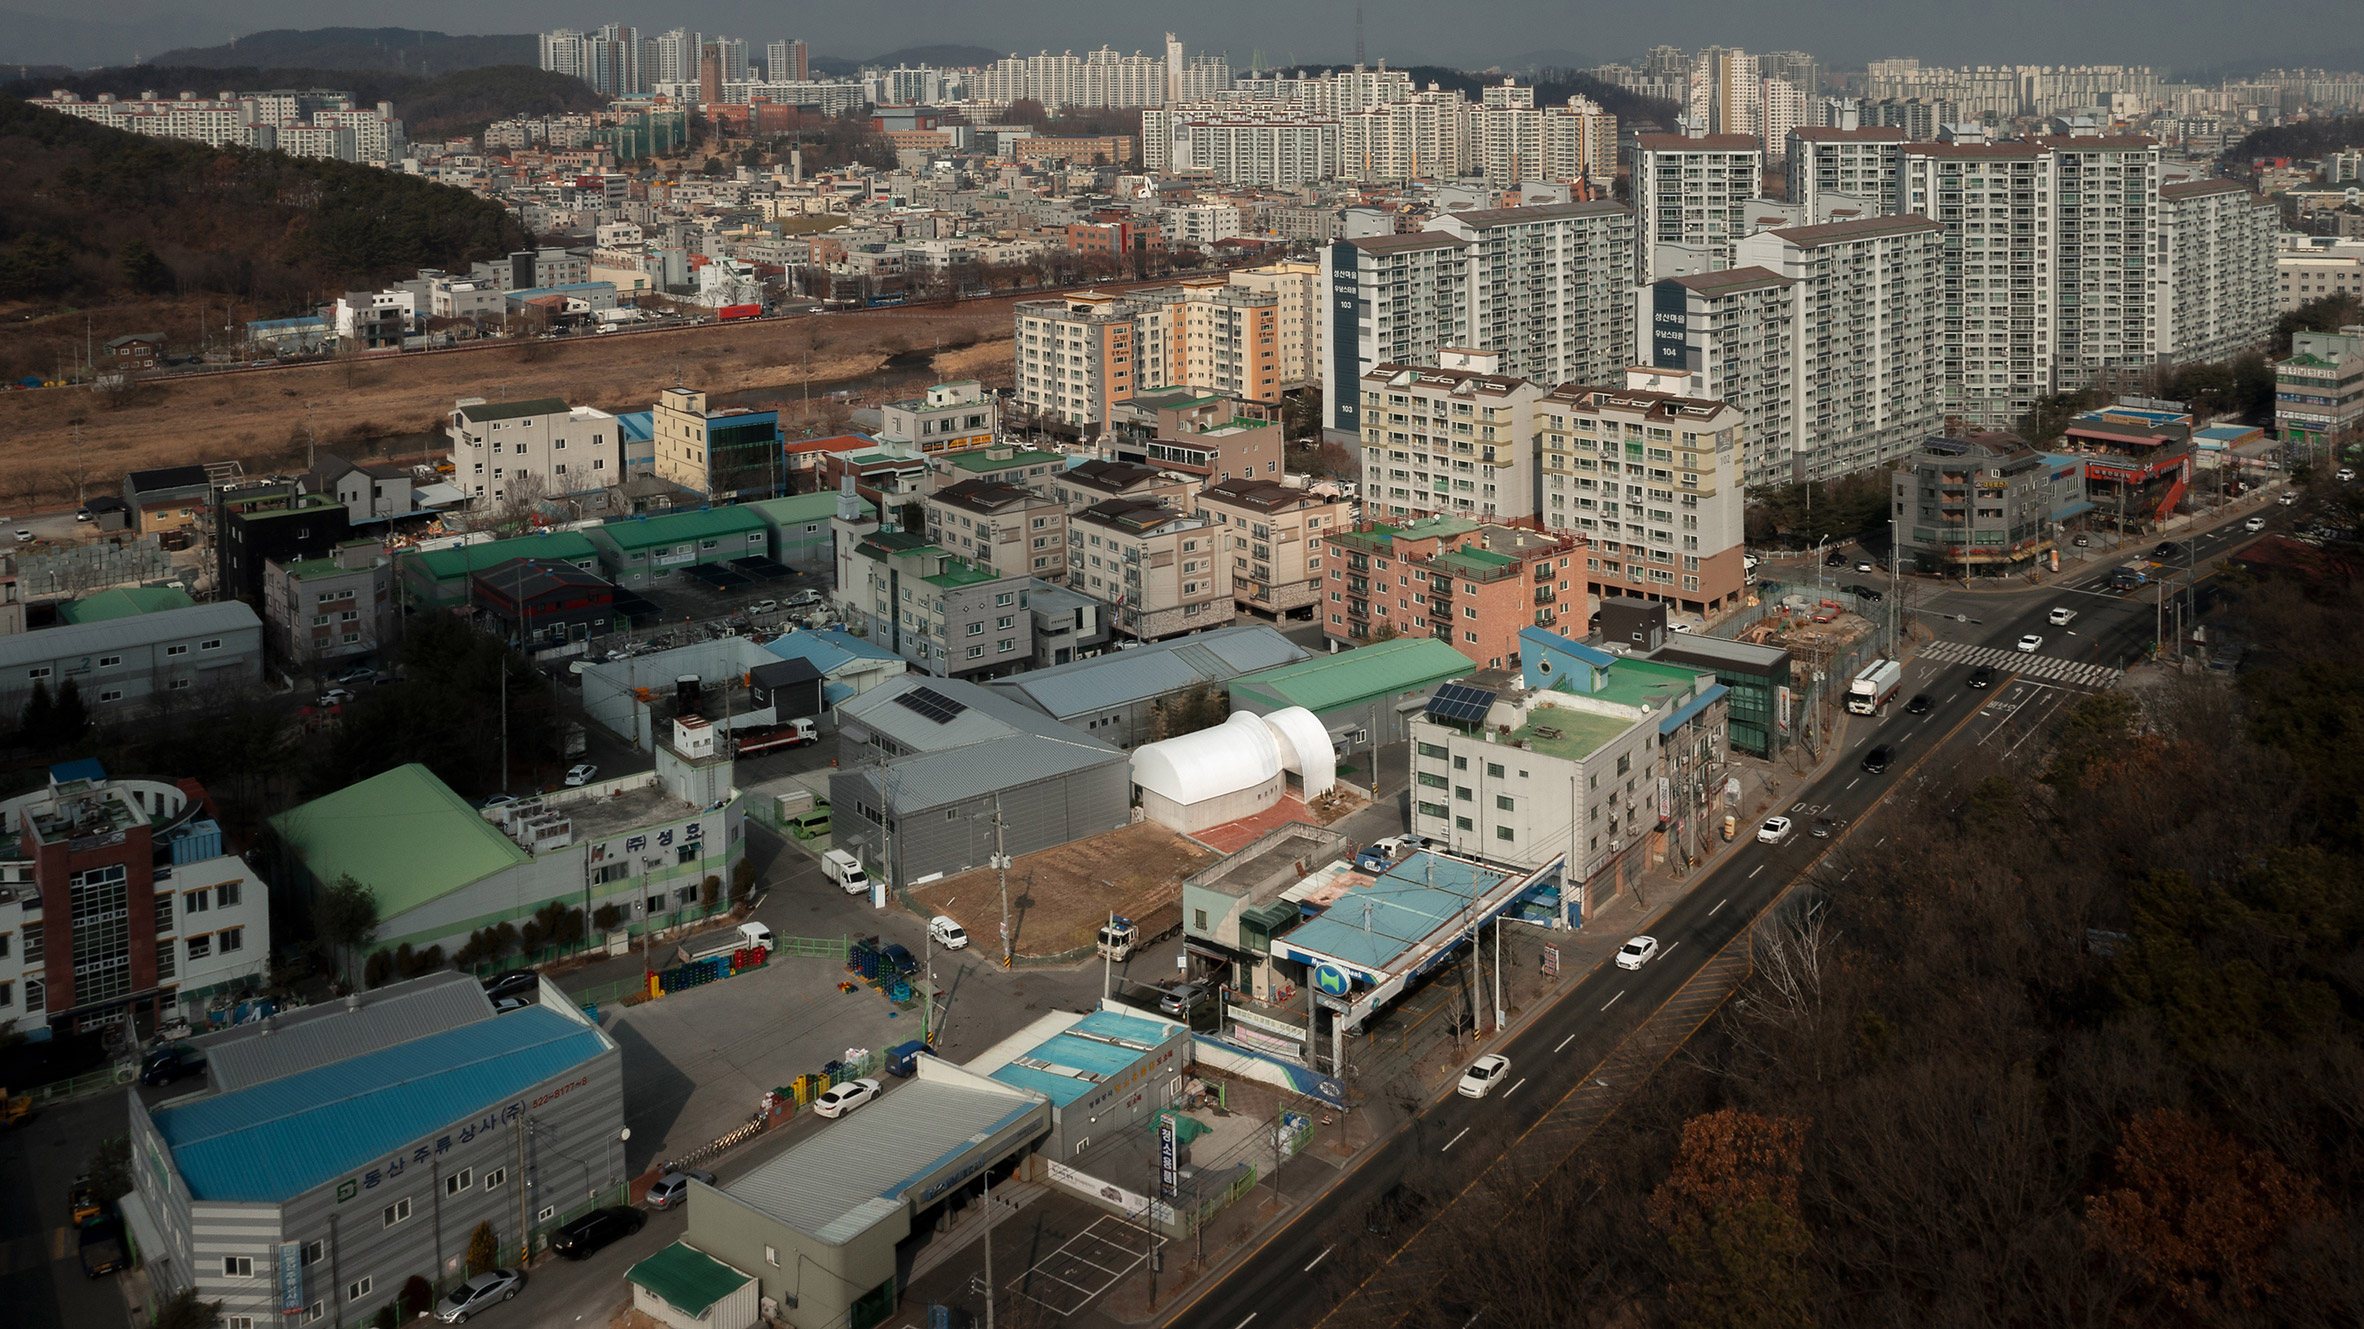 Aerial view of Curving Block in South Korea by SukCholMok